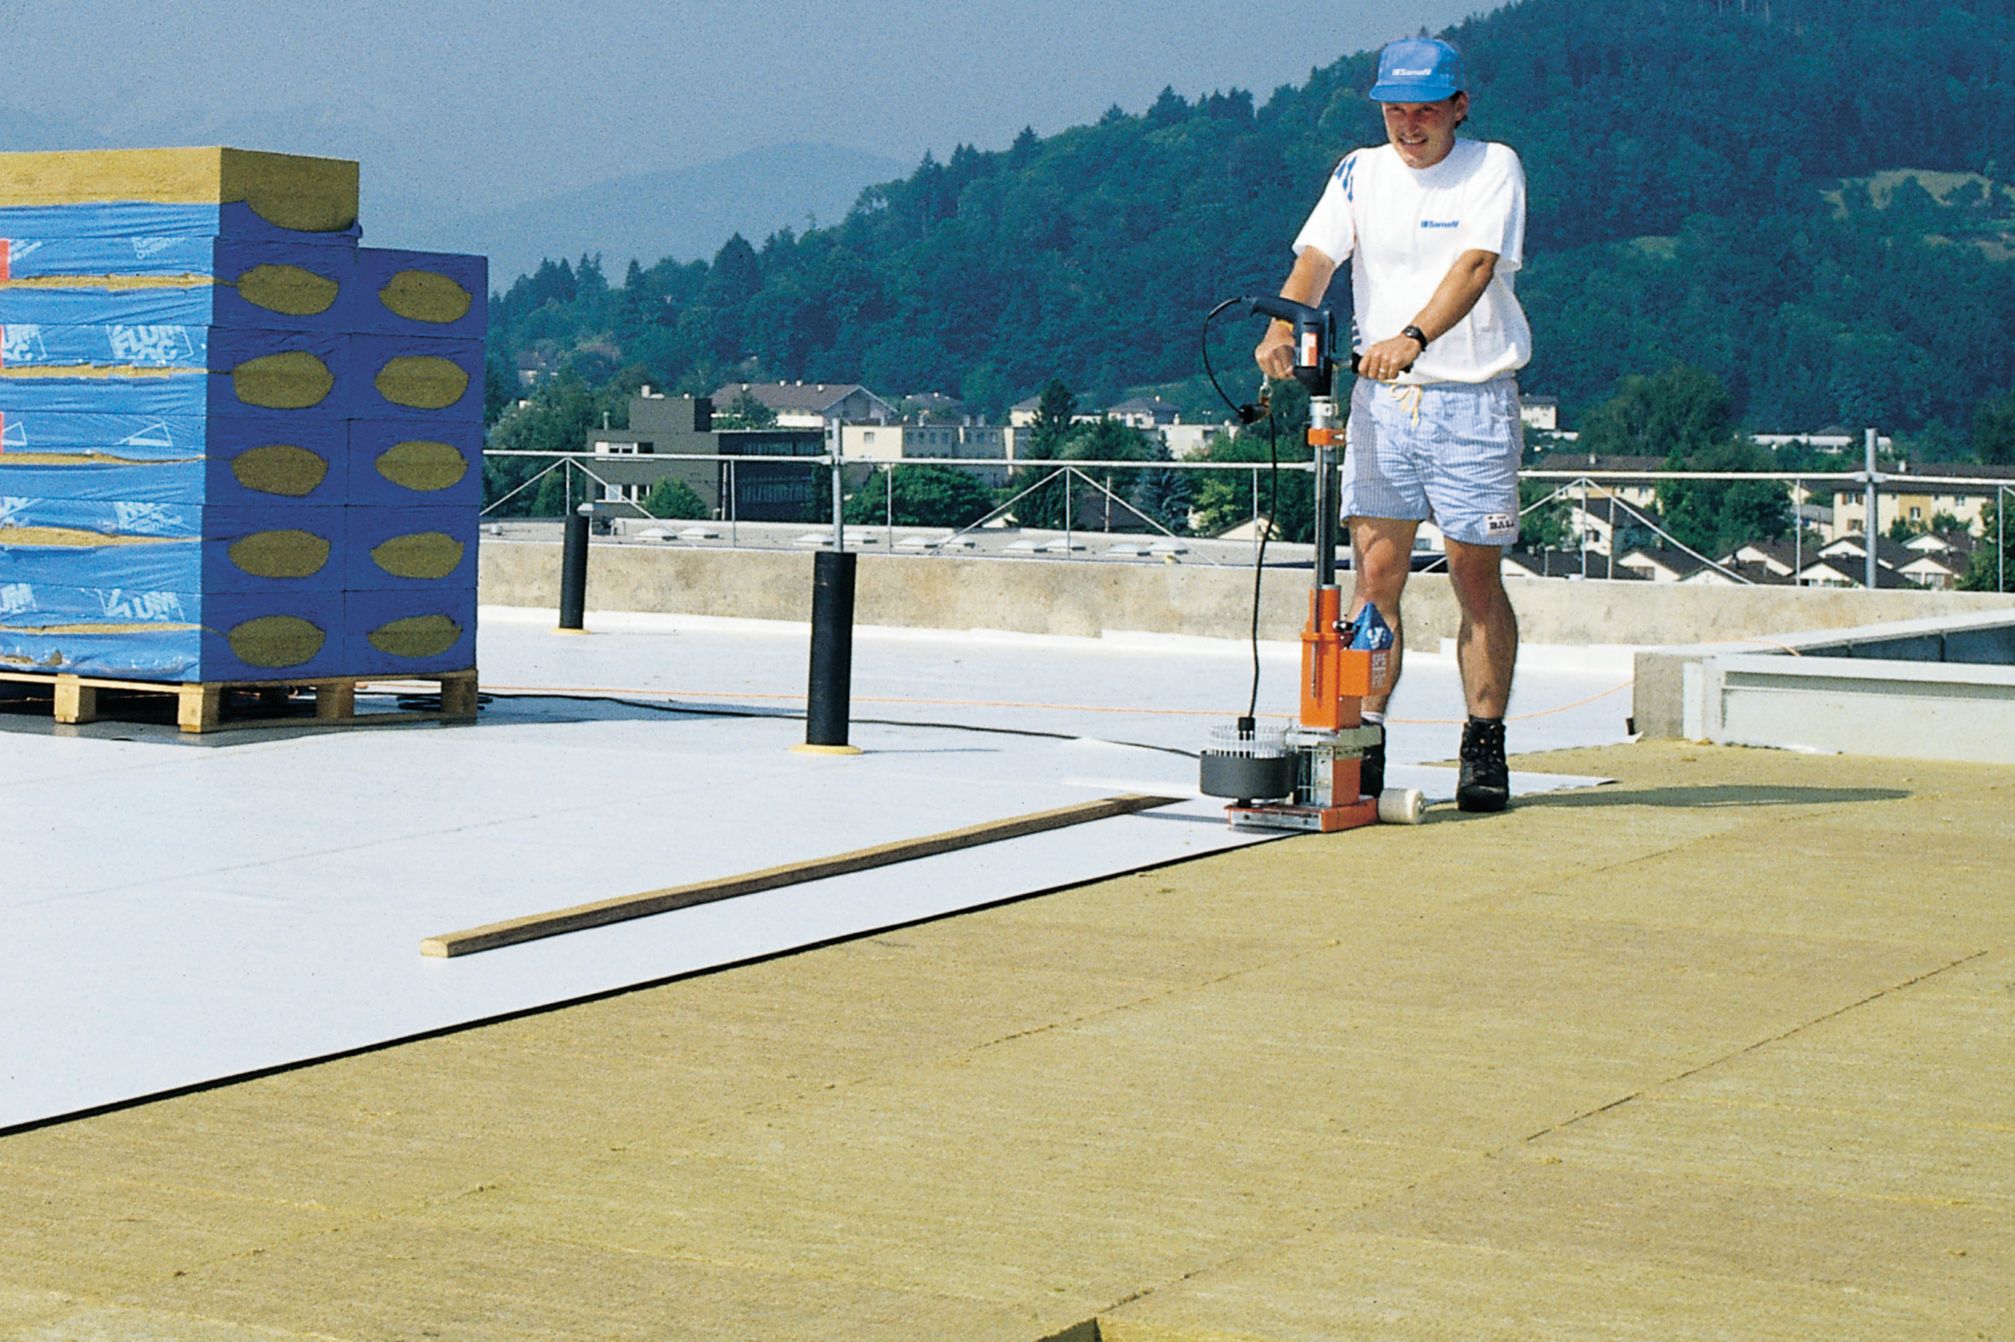 Man installing thermal insulation with a machine